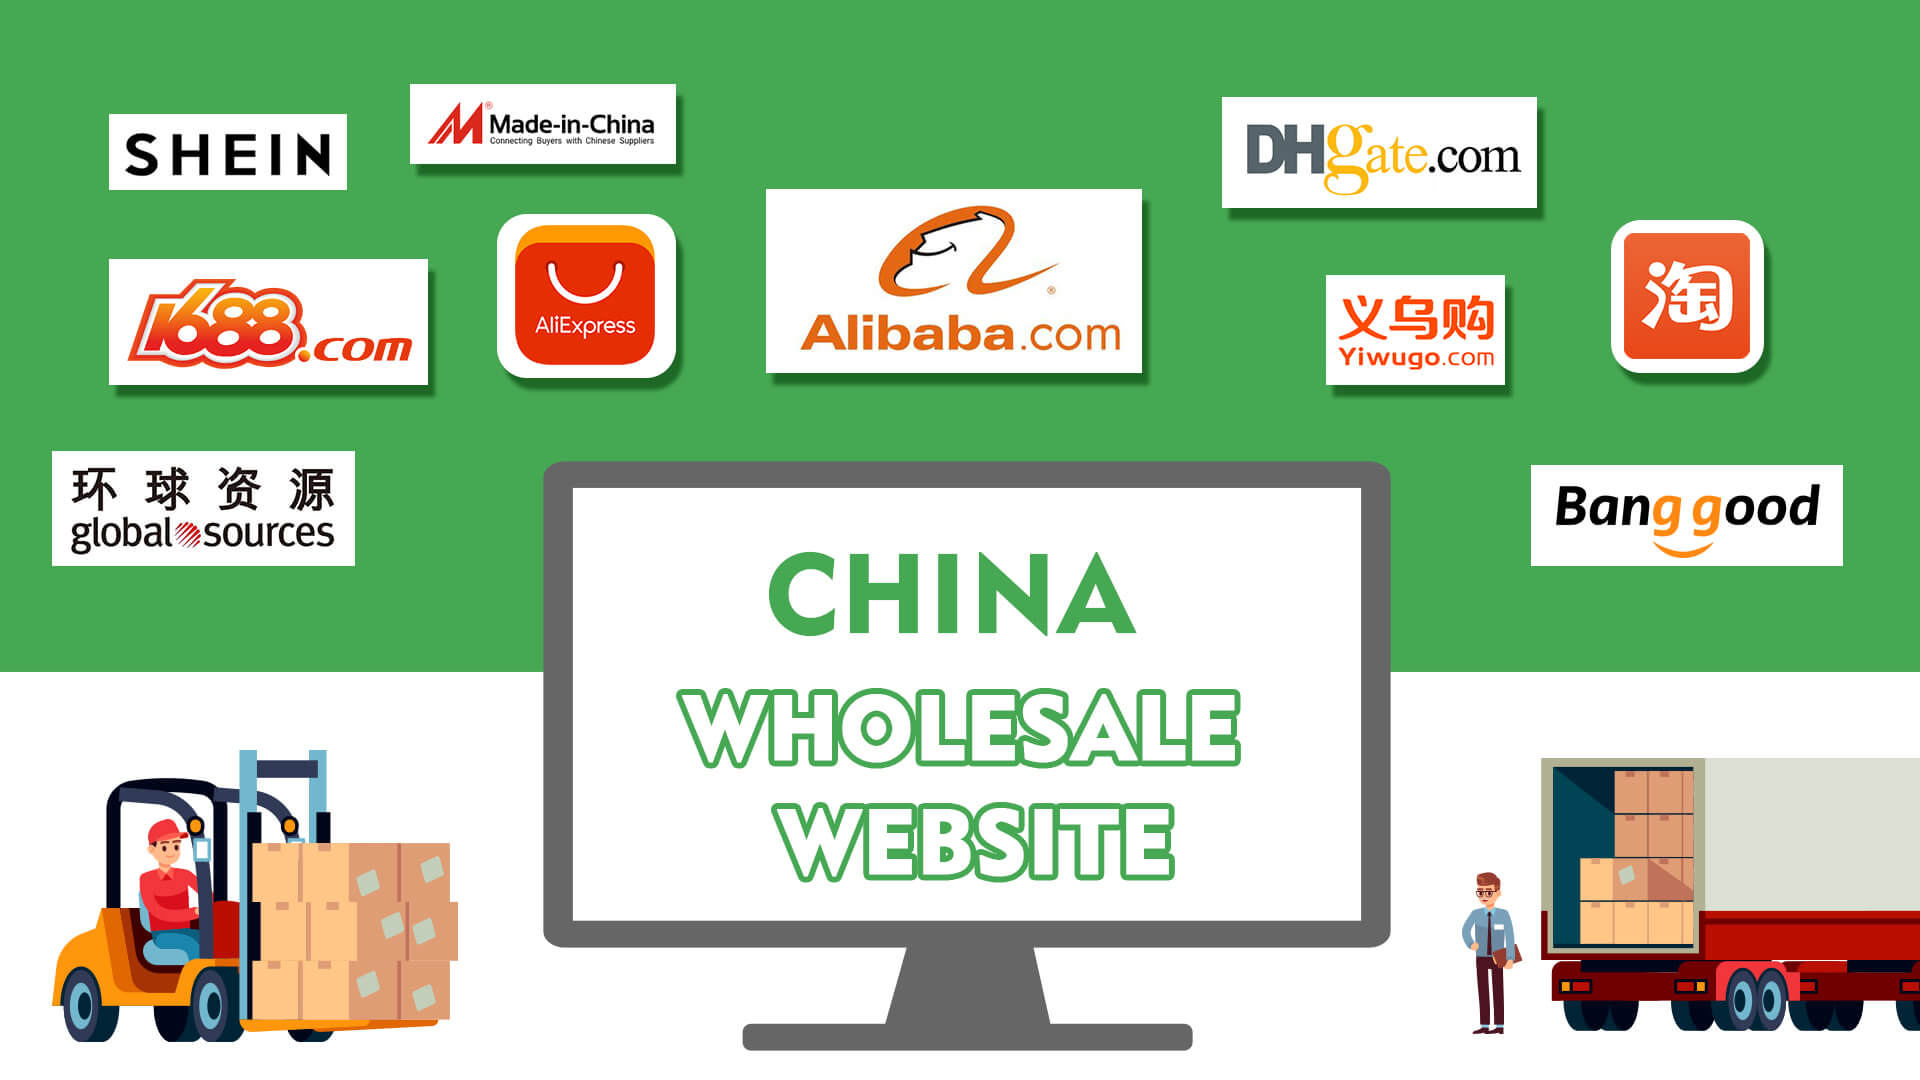 DHGate Reviews: Is DHgate A Good Choice to Source from China?